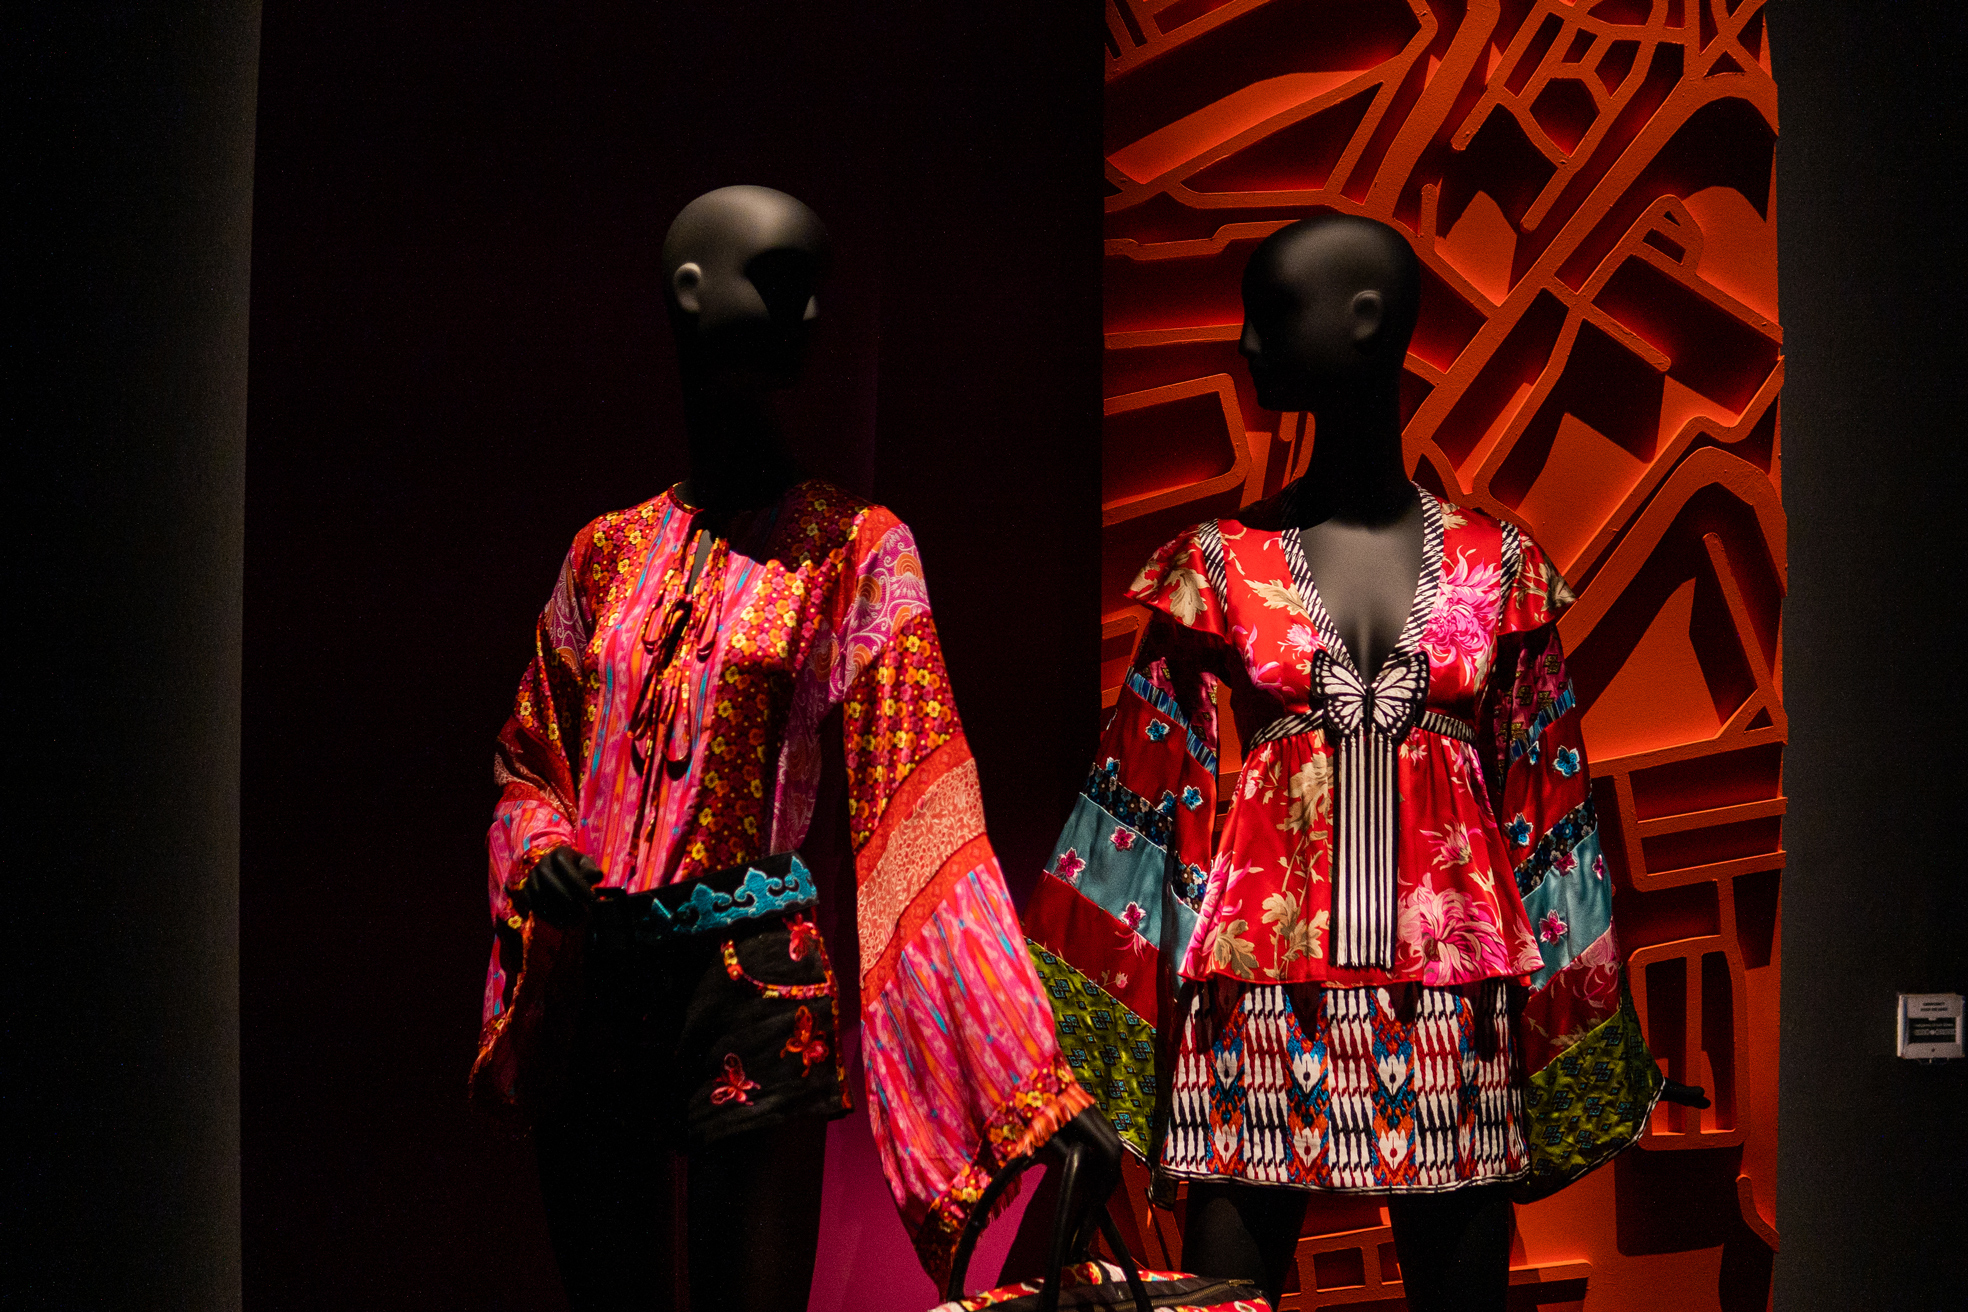 Asian inspired dresses created by Andrew Gn in the ‘Envisioning Asia’ section of the exhibition.